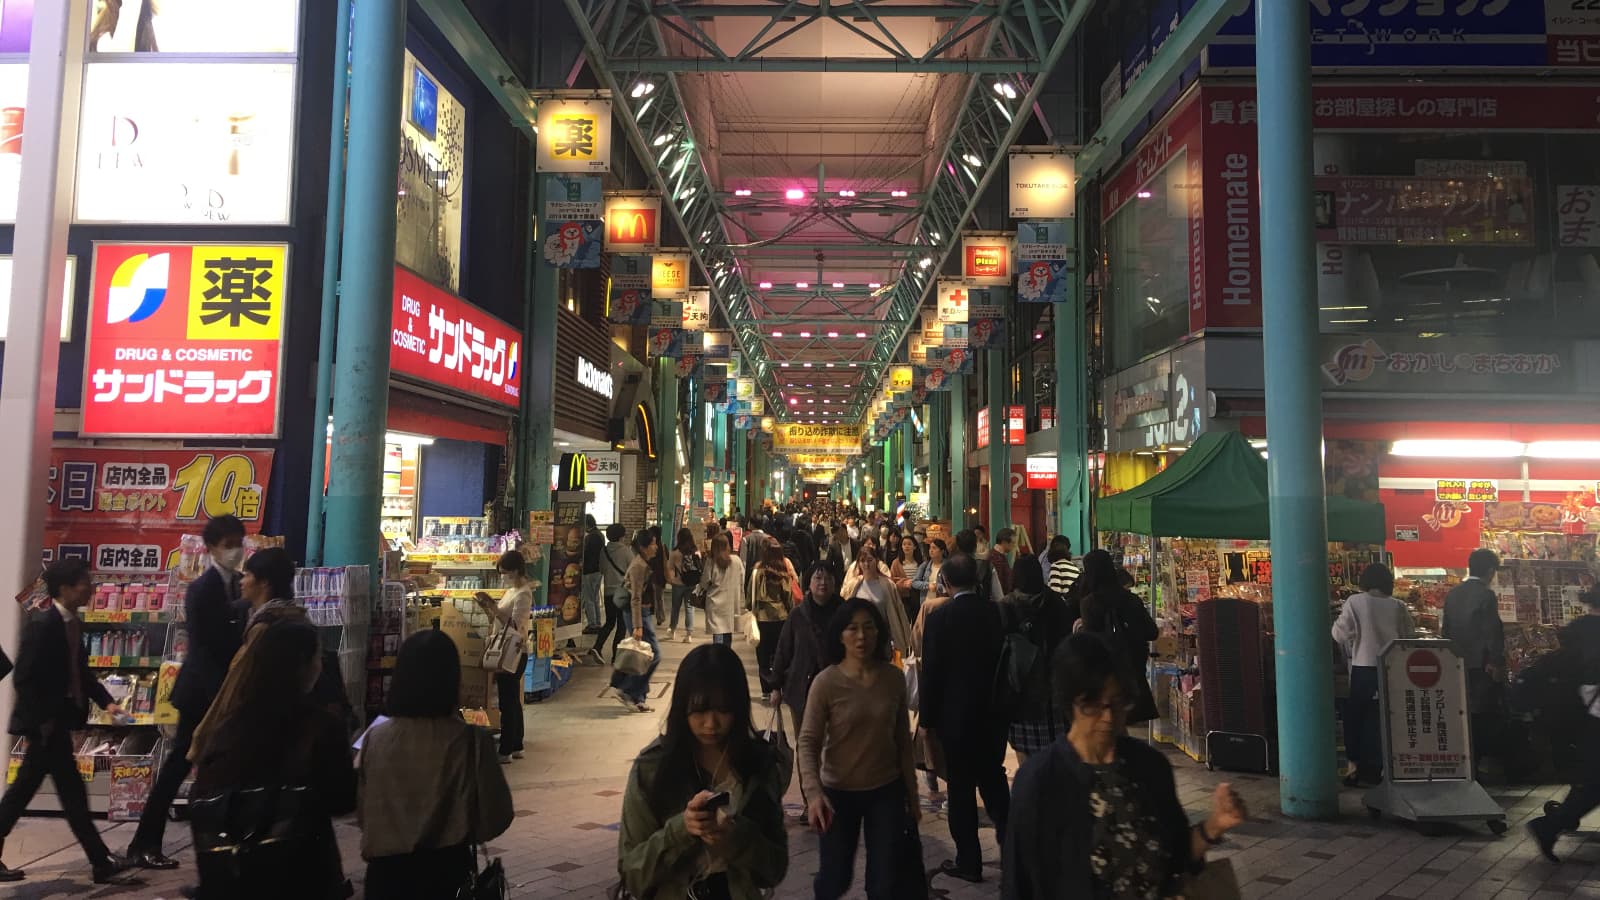 The shopping arcade of Kichijoji, a bustling outdoor mall packed with great food and shopping.